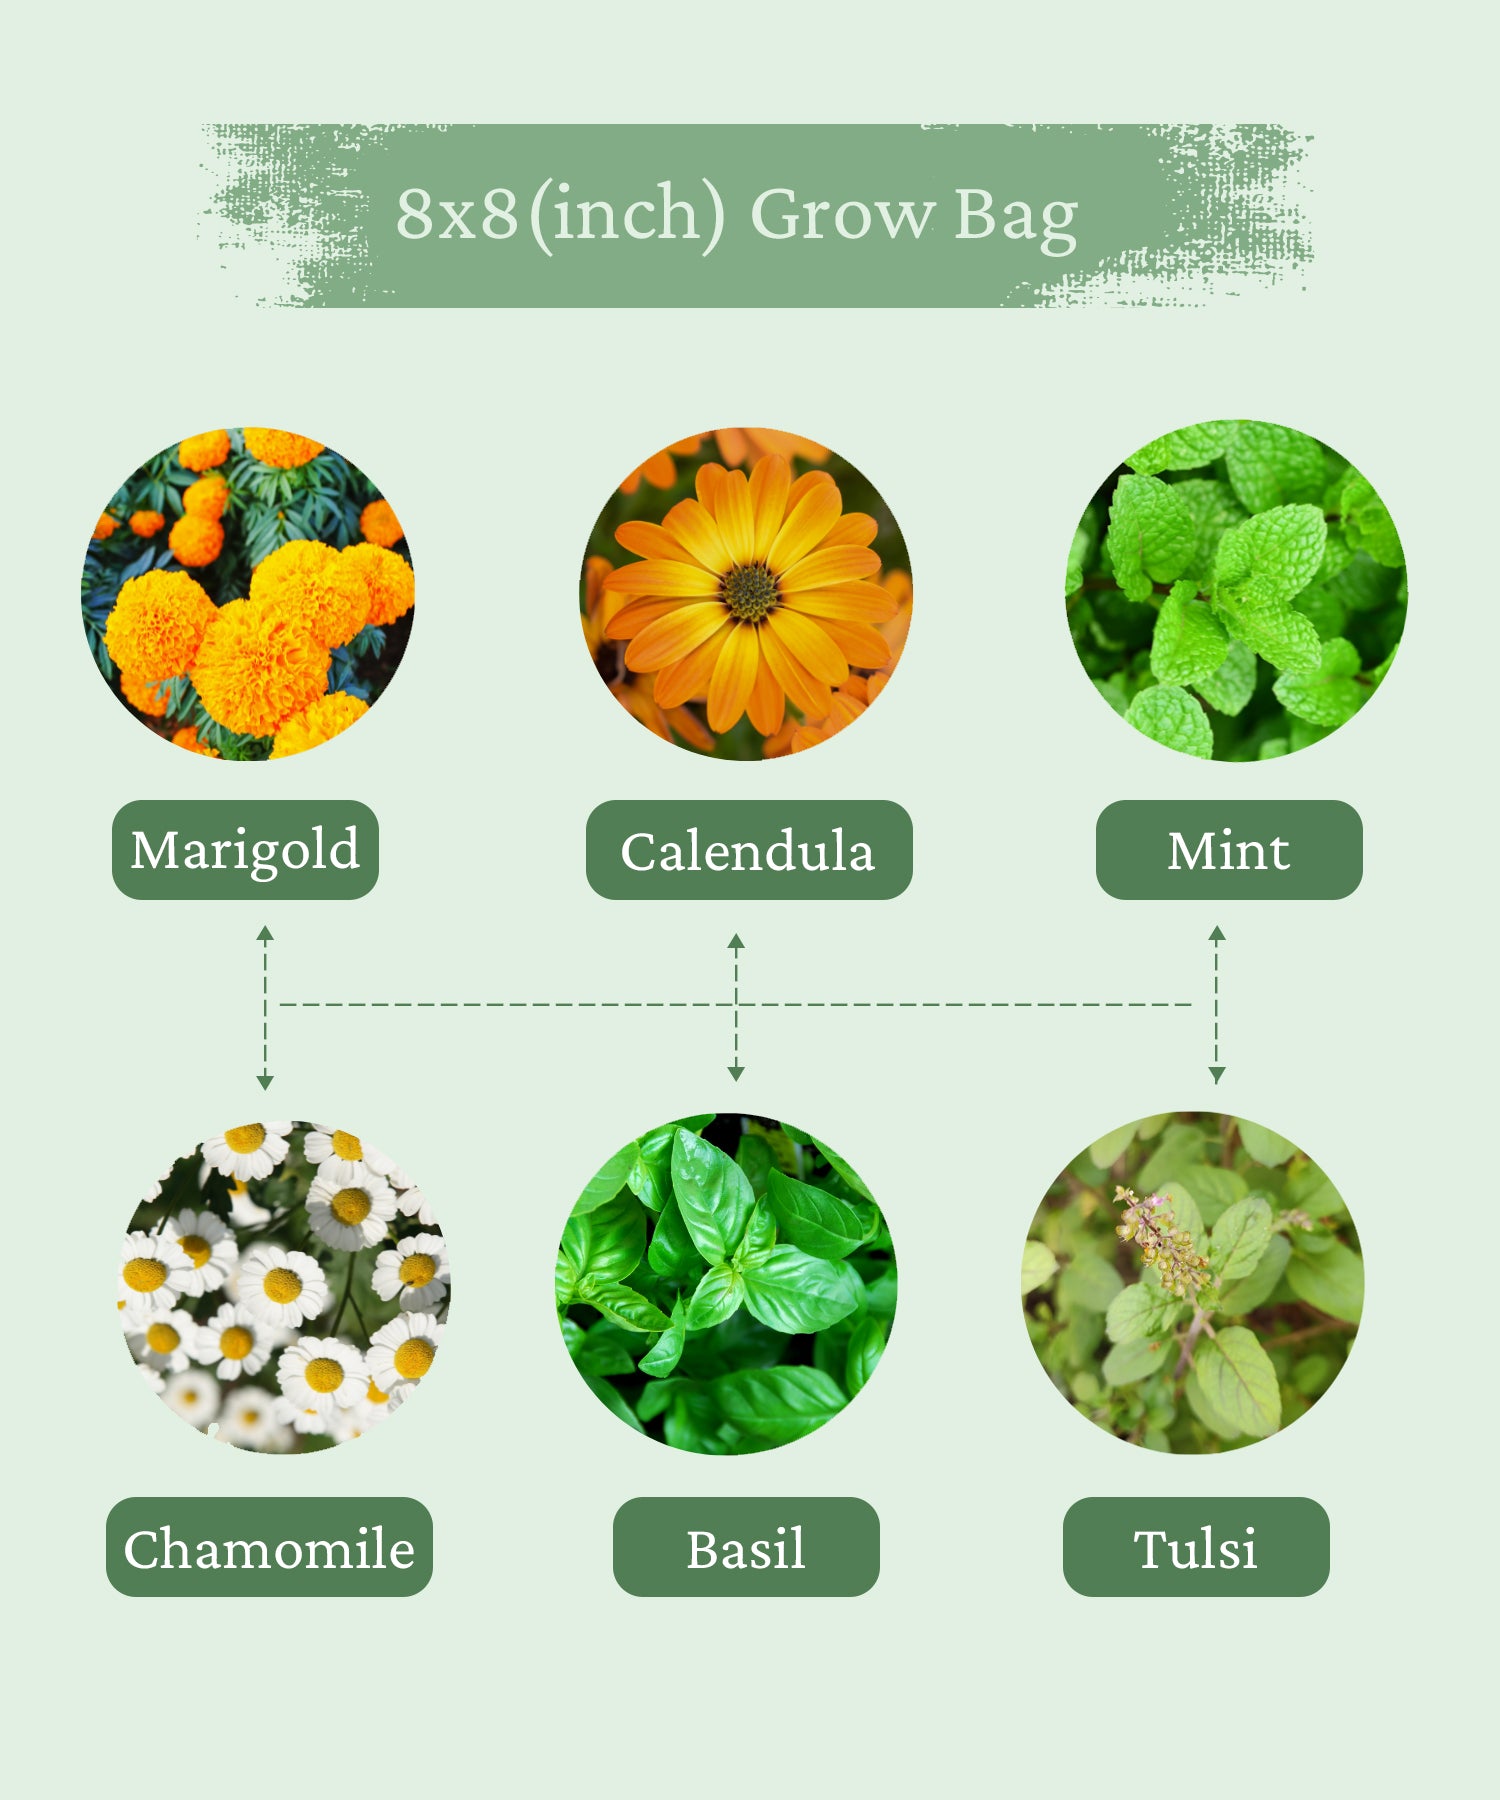 grow bags for vegetables,grow bags price